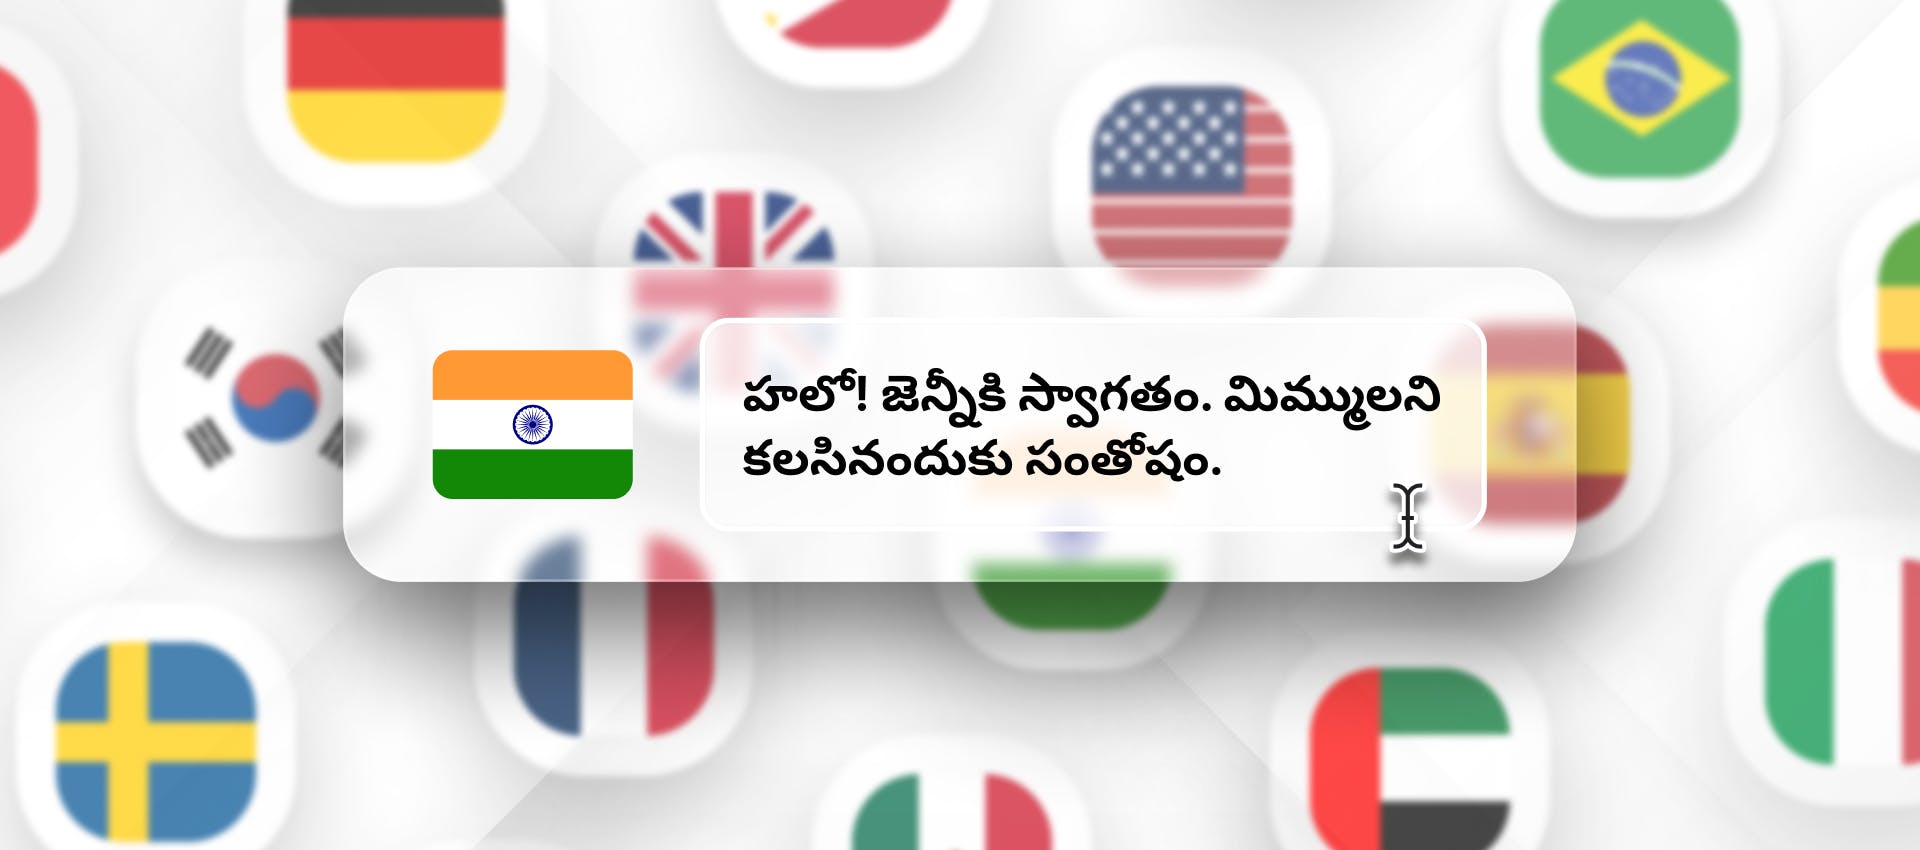 Telugu phrase for Telugu TTS generation with different flags in the background